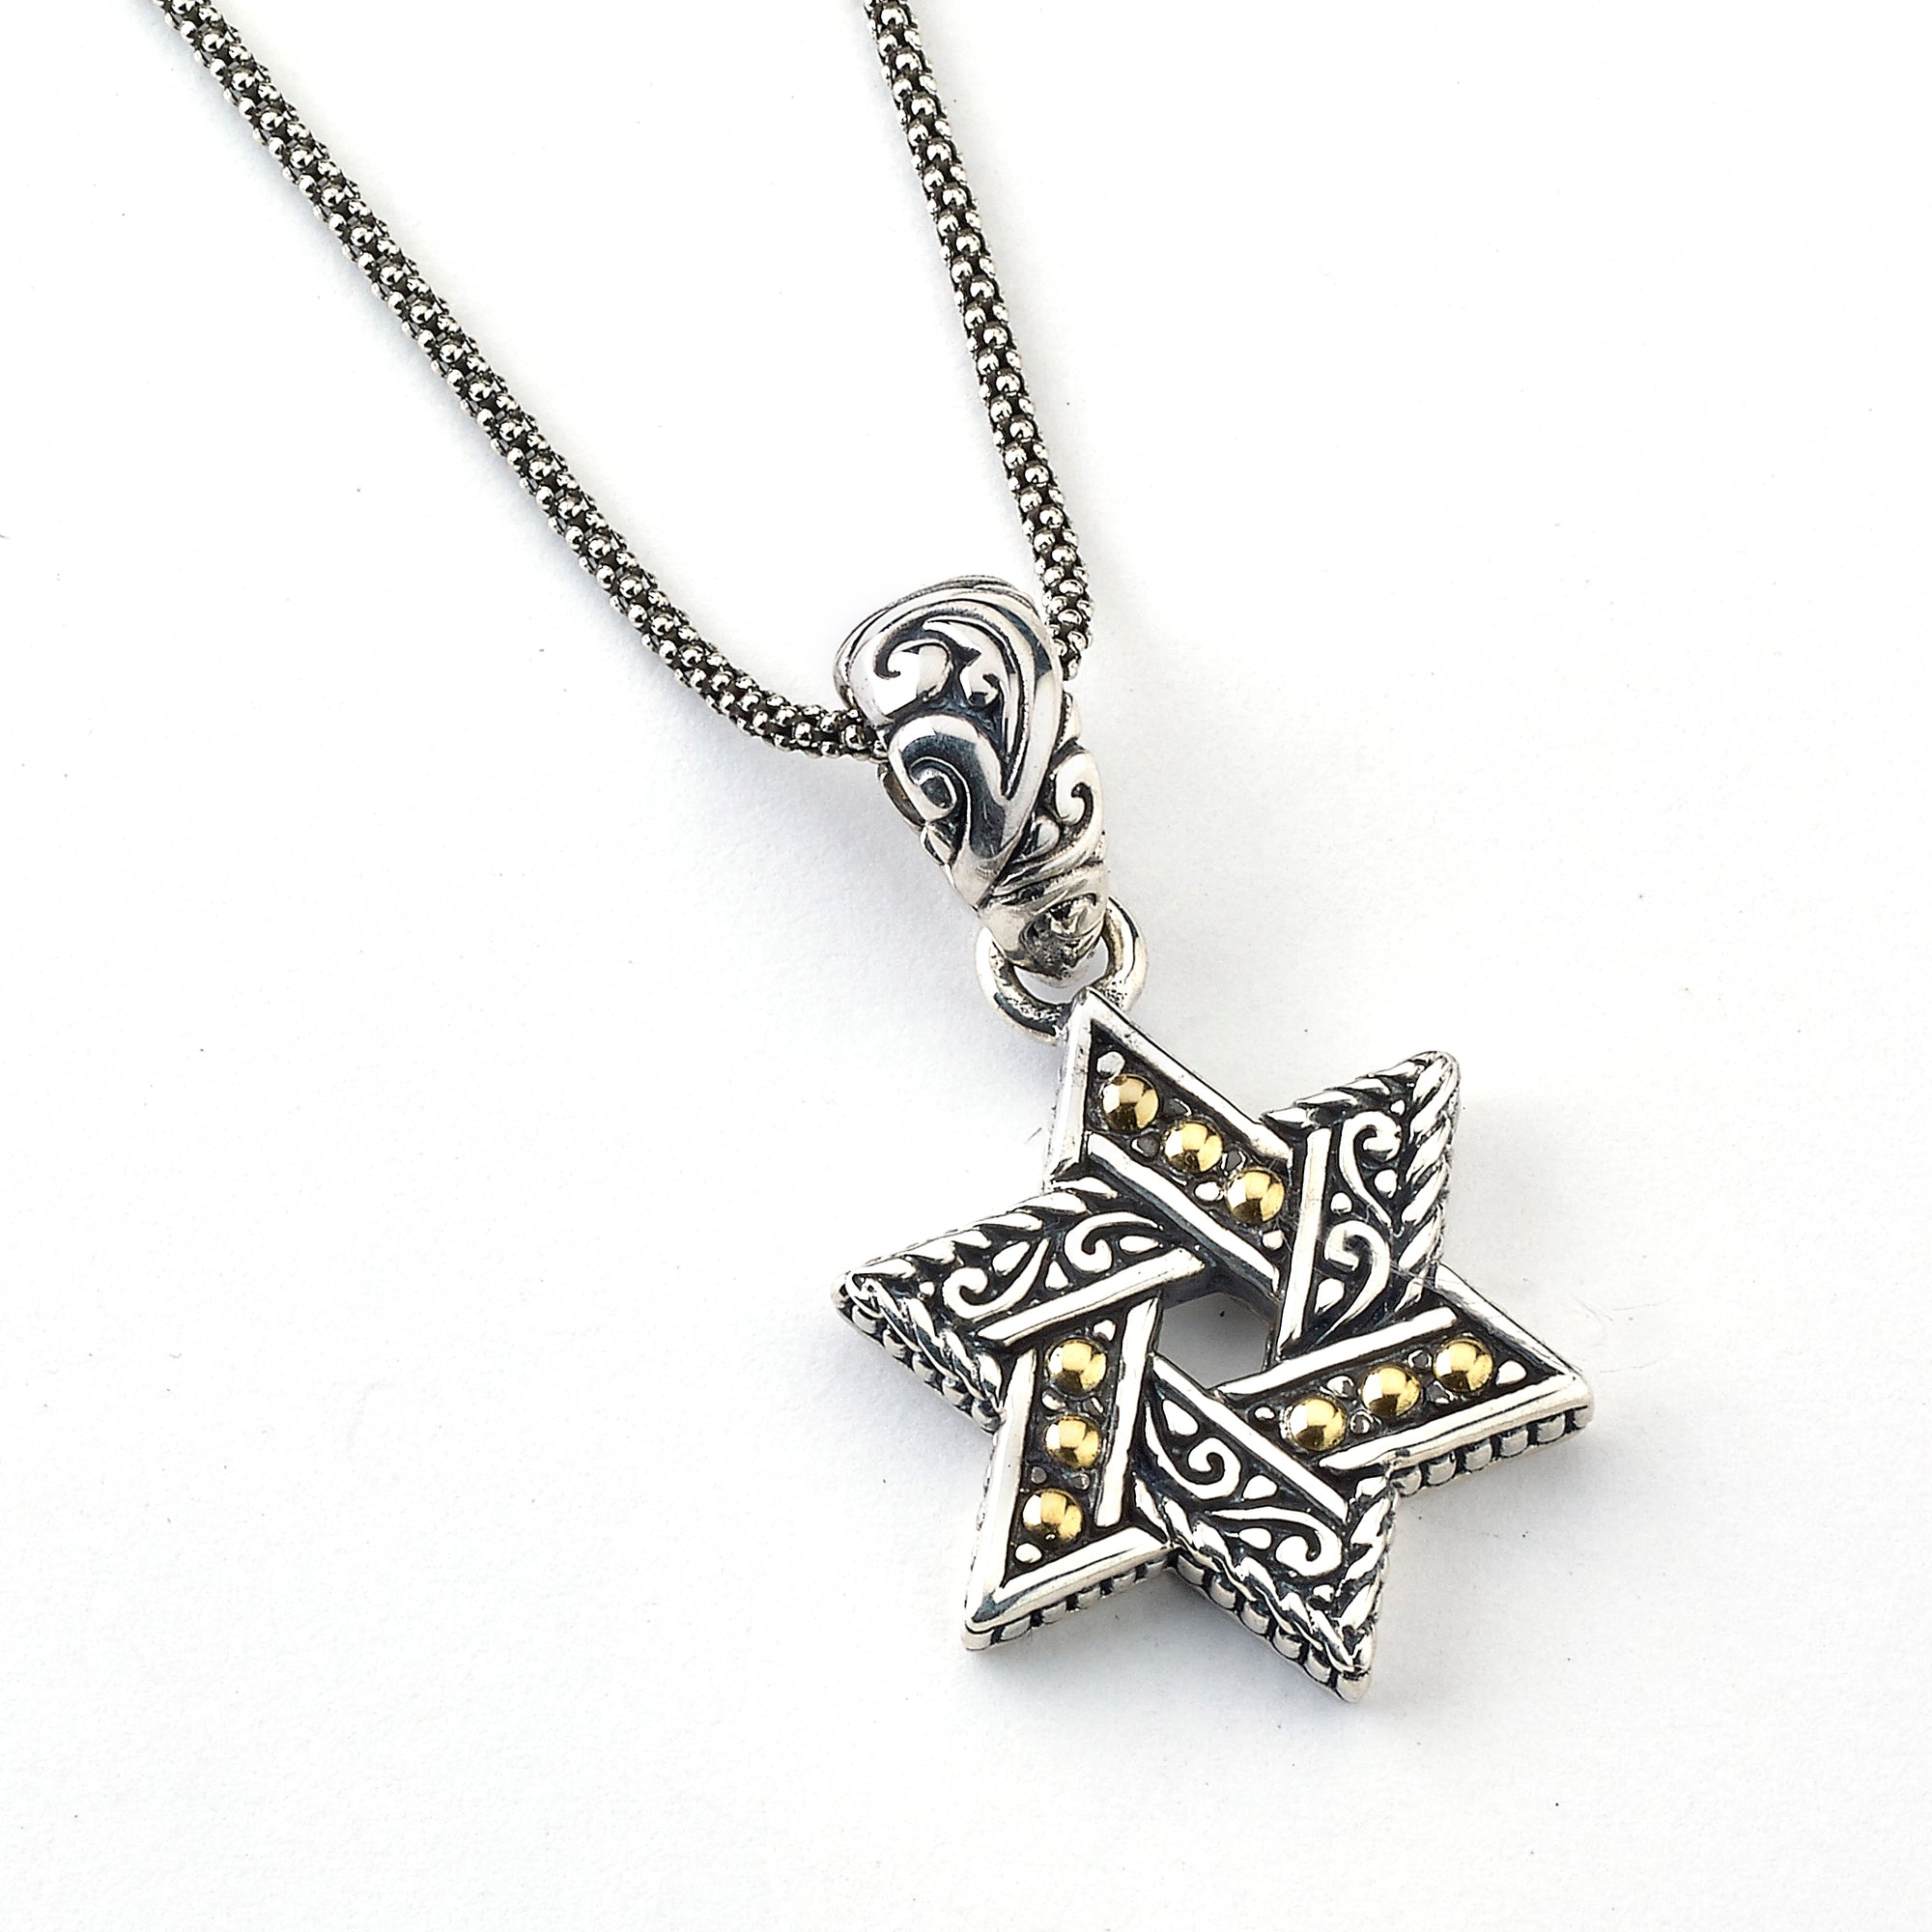 Star of David Pendant Necklace available at Talisman Collection Fine Jewelers in El Dorado Hills, CA and online. 